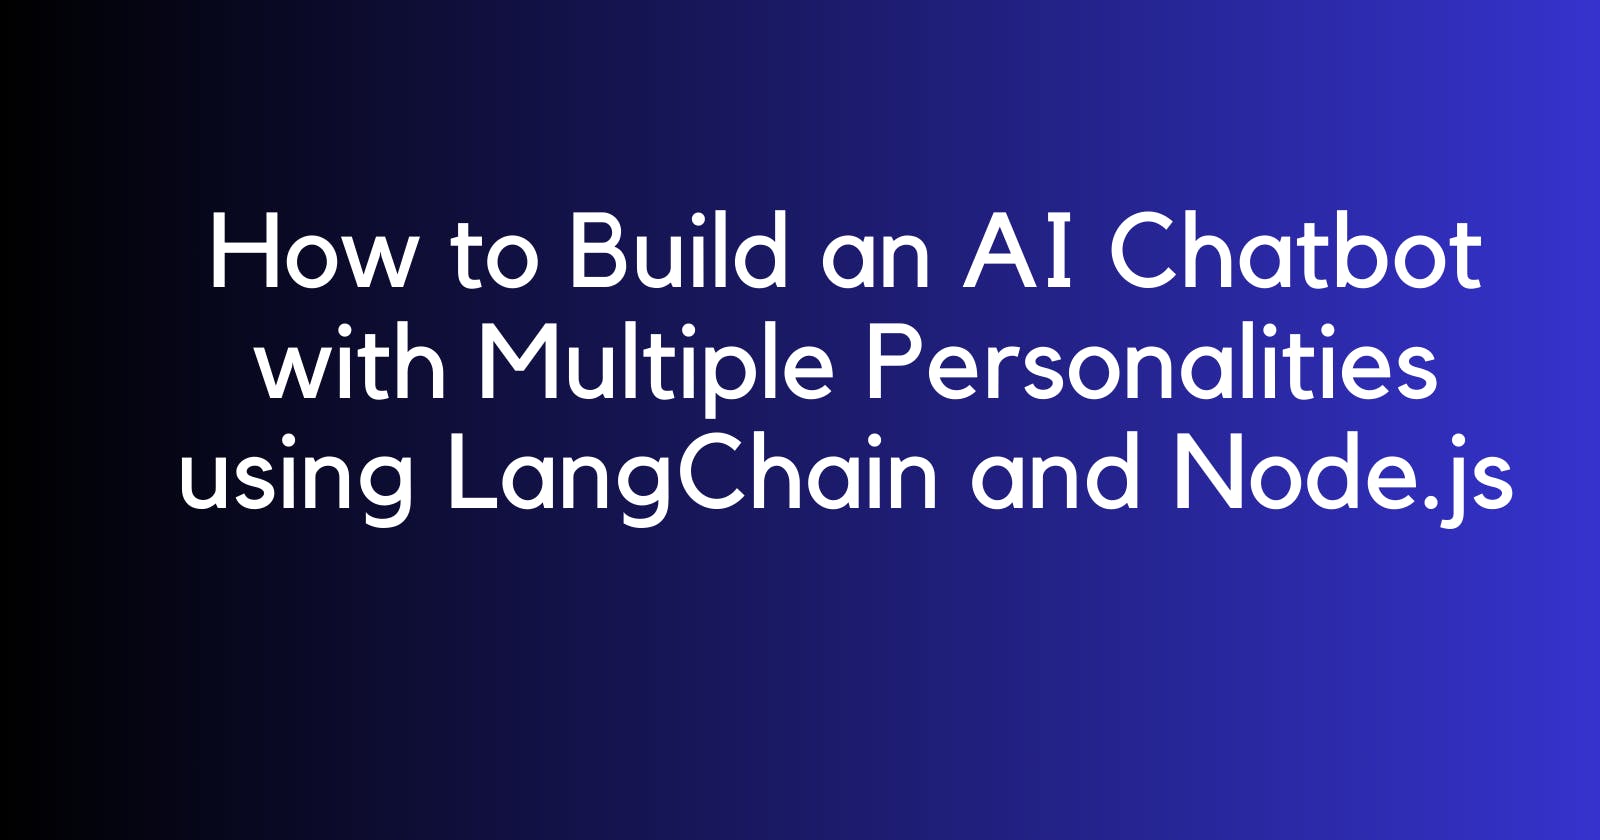 How to Build an AI Chatbot with Multiple Personalities using LangChain and Node.js